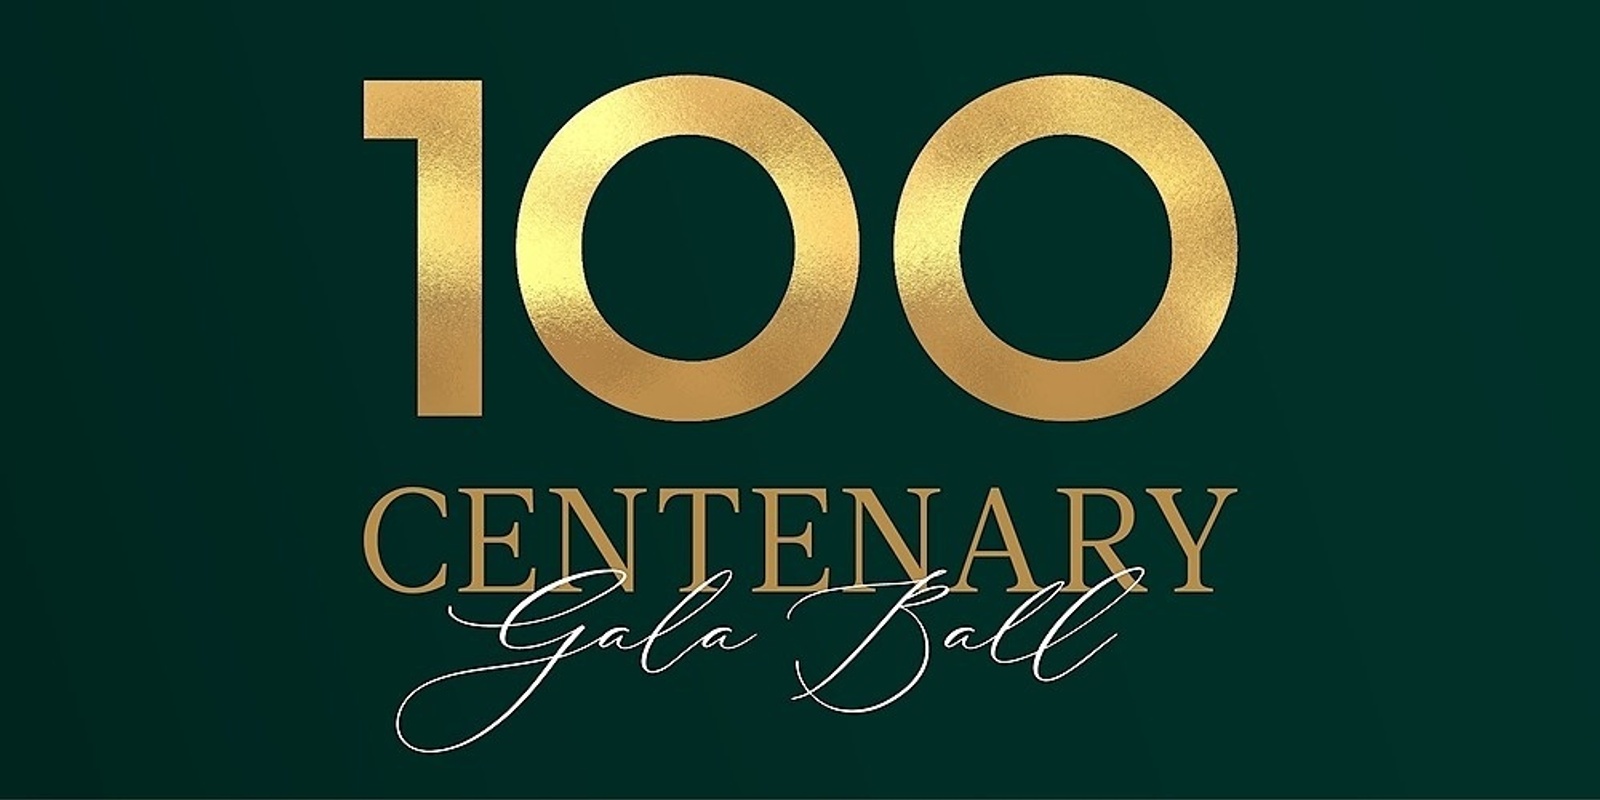 Banner image for Wesley College's Centenary Gala Ball